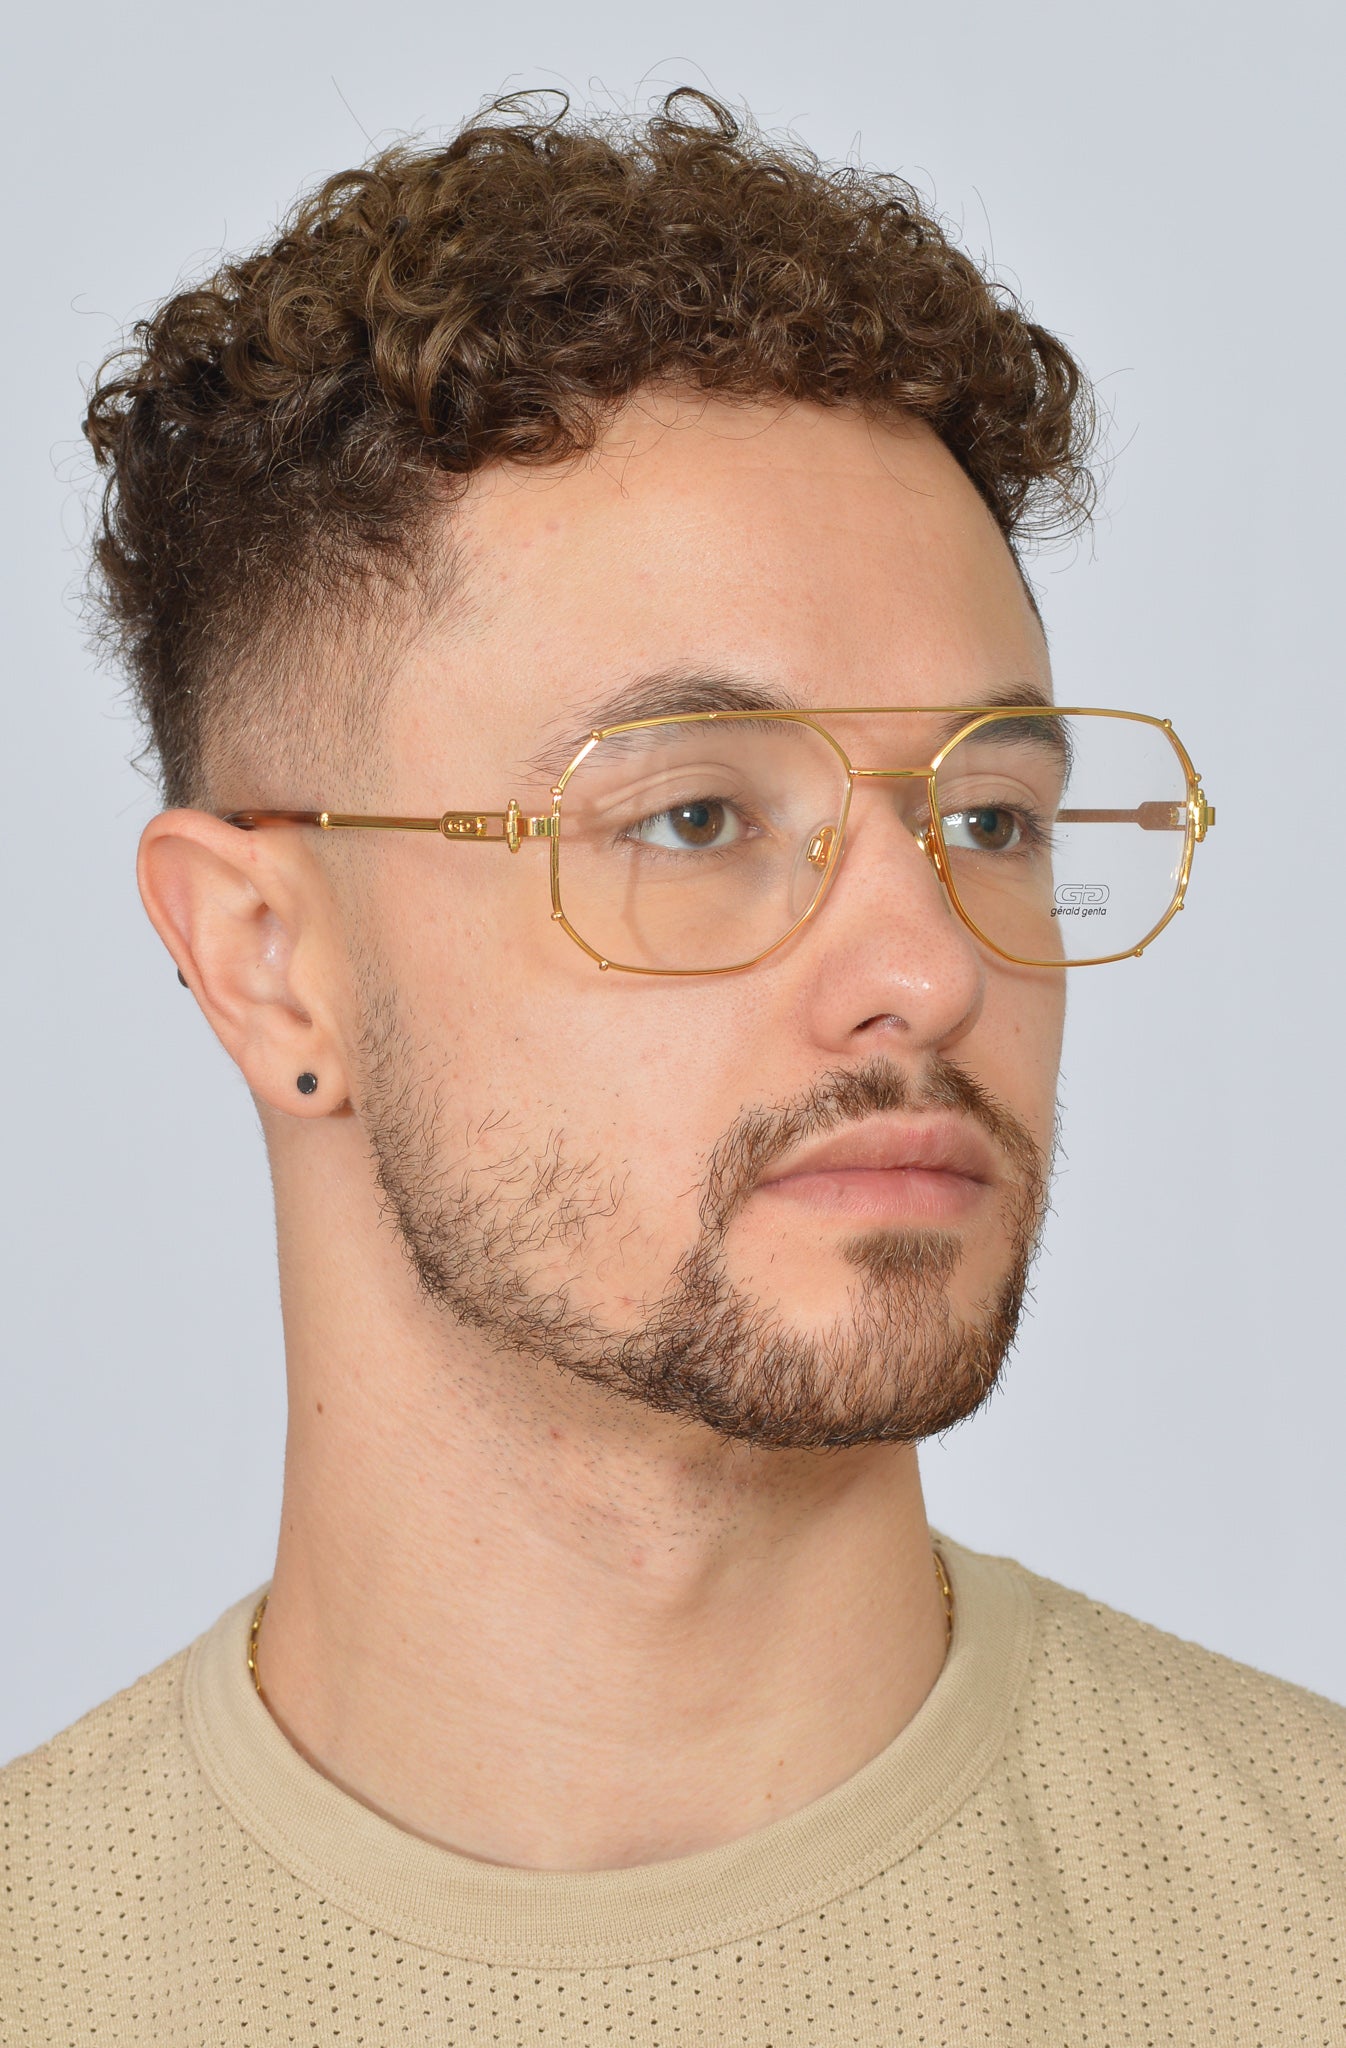 Gèrald Genta Gold and Gold 01 Vintage Glasses. Gèrald Genta Sunglasses. Gold Plated Glasses. Gold Plated Sunglasses. Rare Vintage Glasses. Rapper Sunglasses. As seen on Mist.